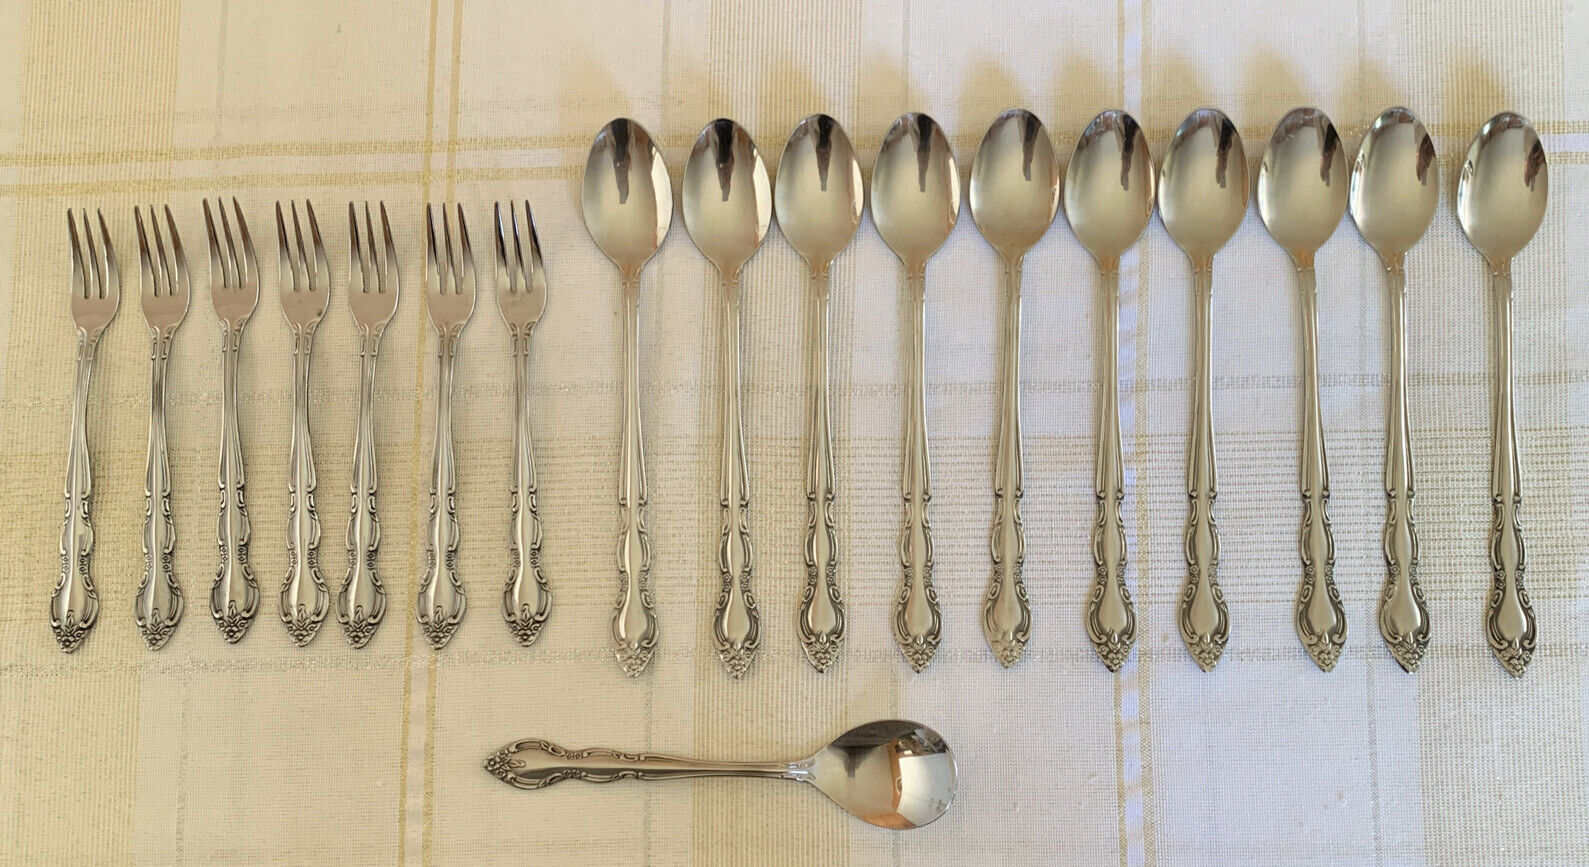 FLEURETTE Imperial Intl IIC Inox Flatware 18 Pcs IMIFLE Stainless Disc Floral